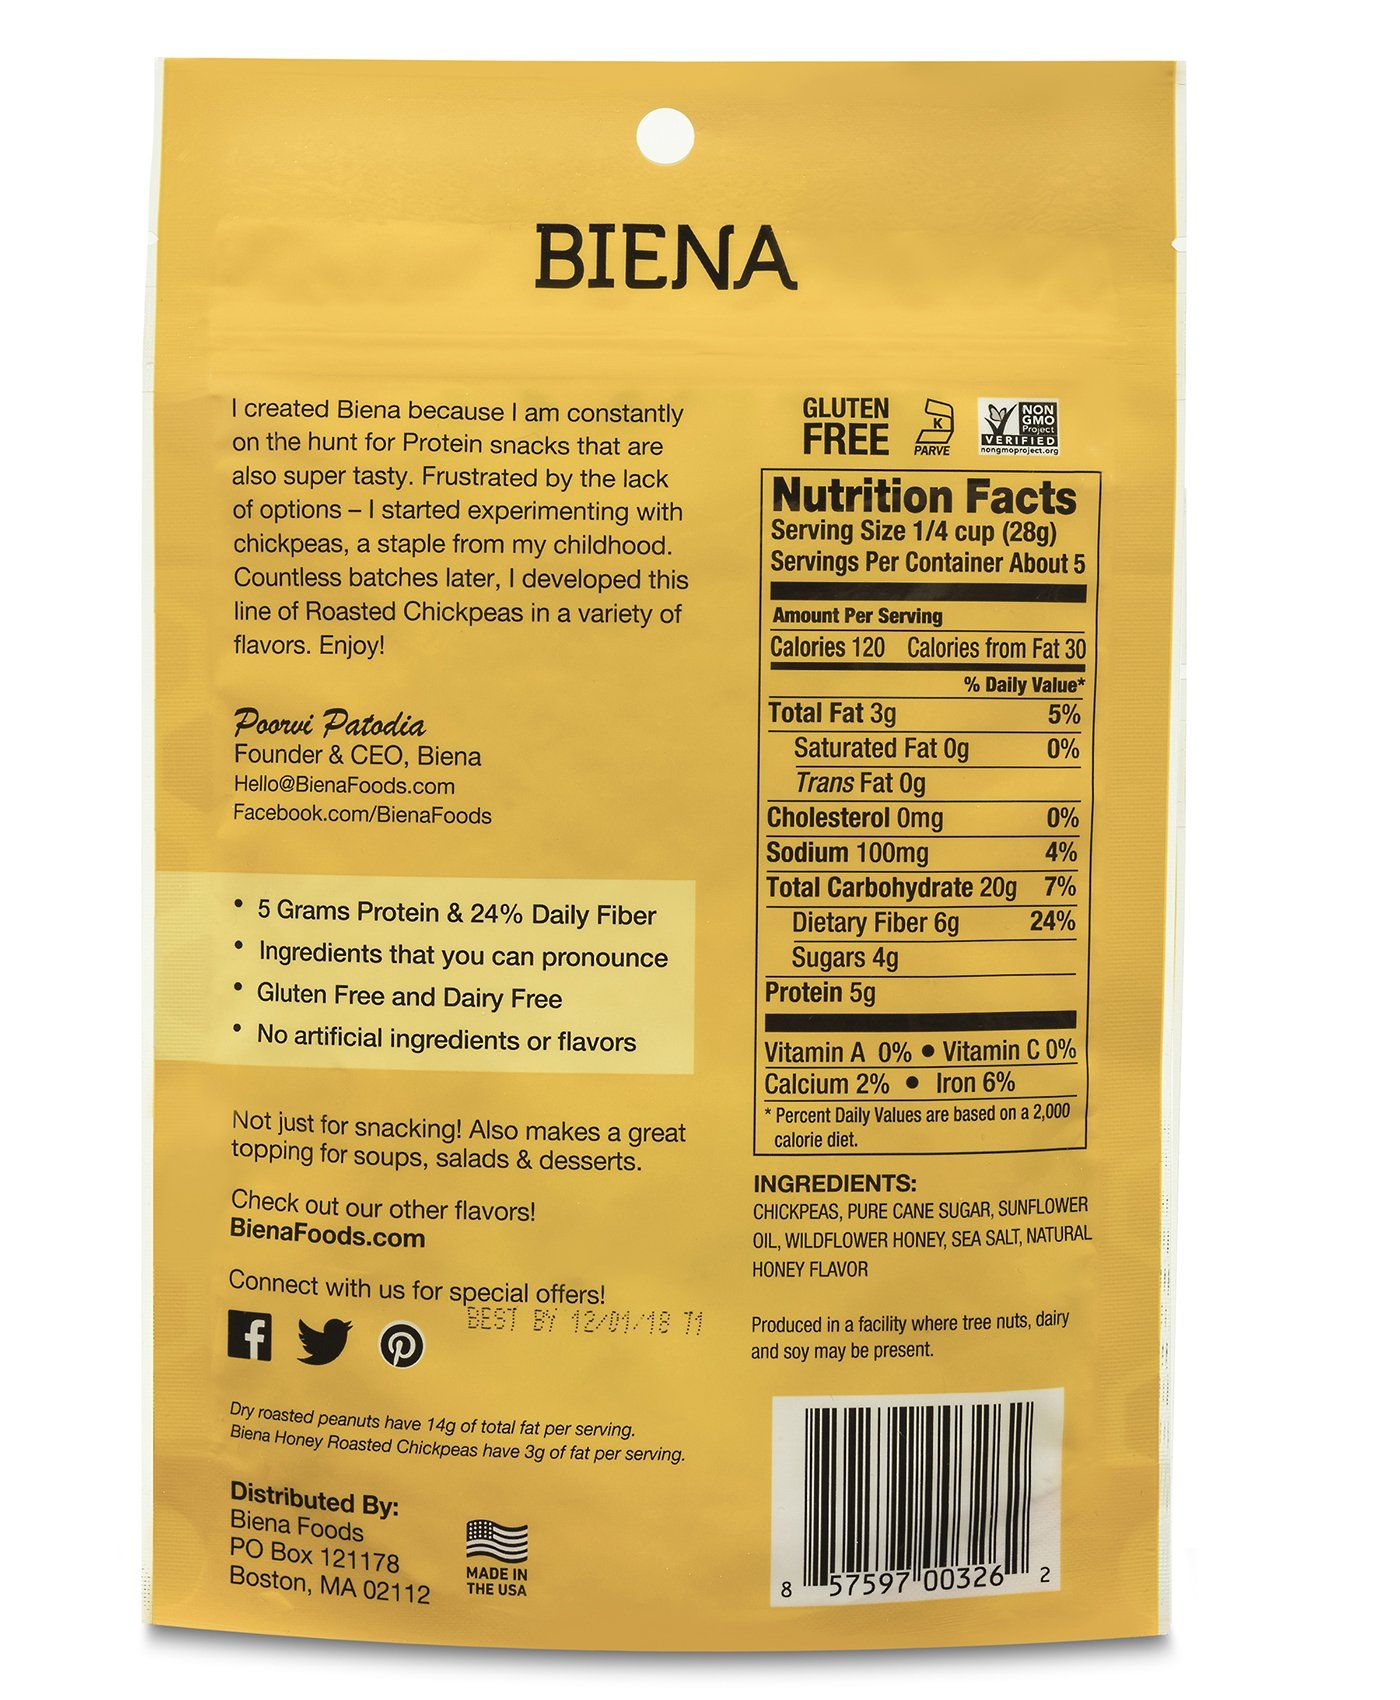 Biena Honey Roasted Chickpeas Nutrition Facts